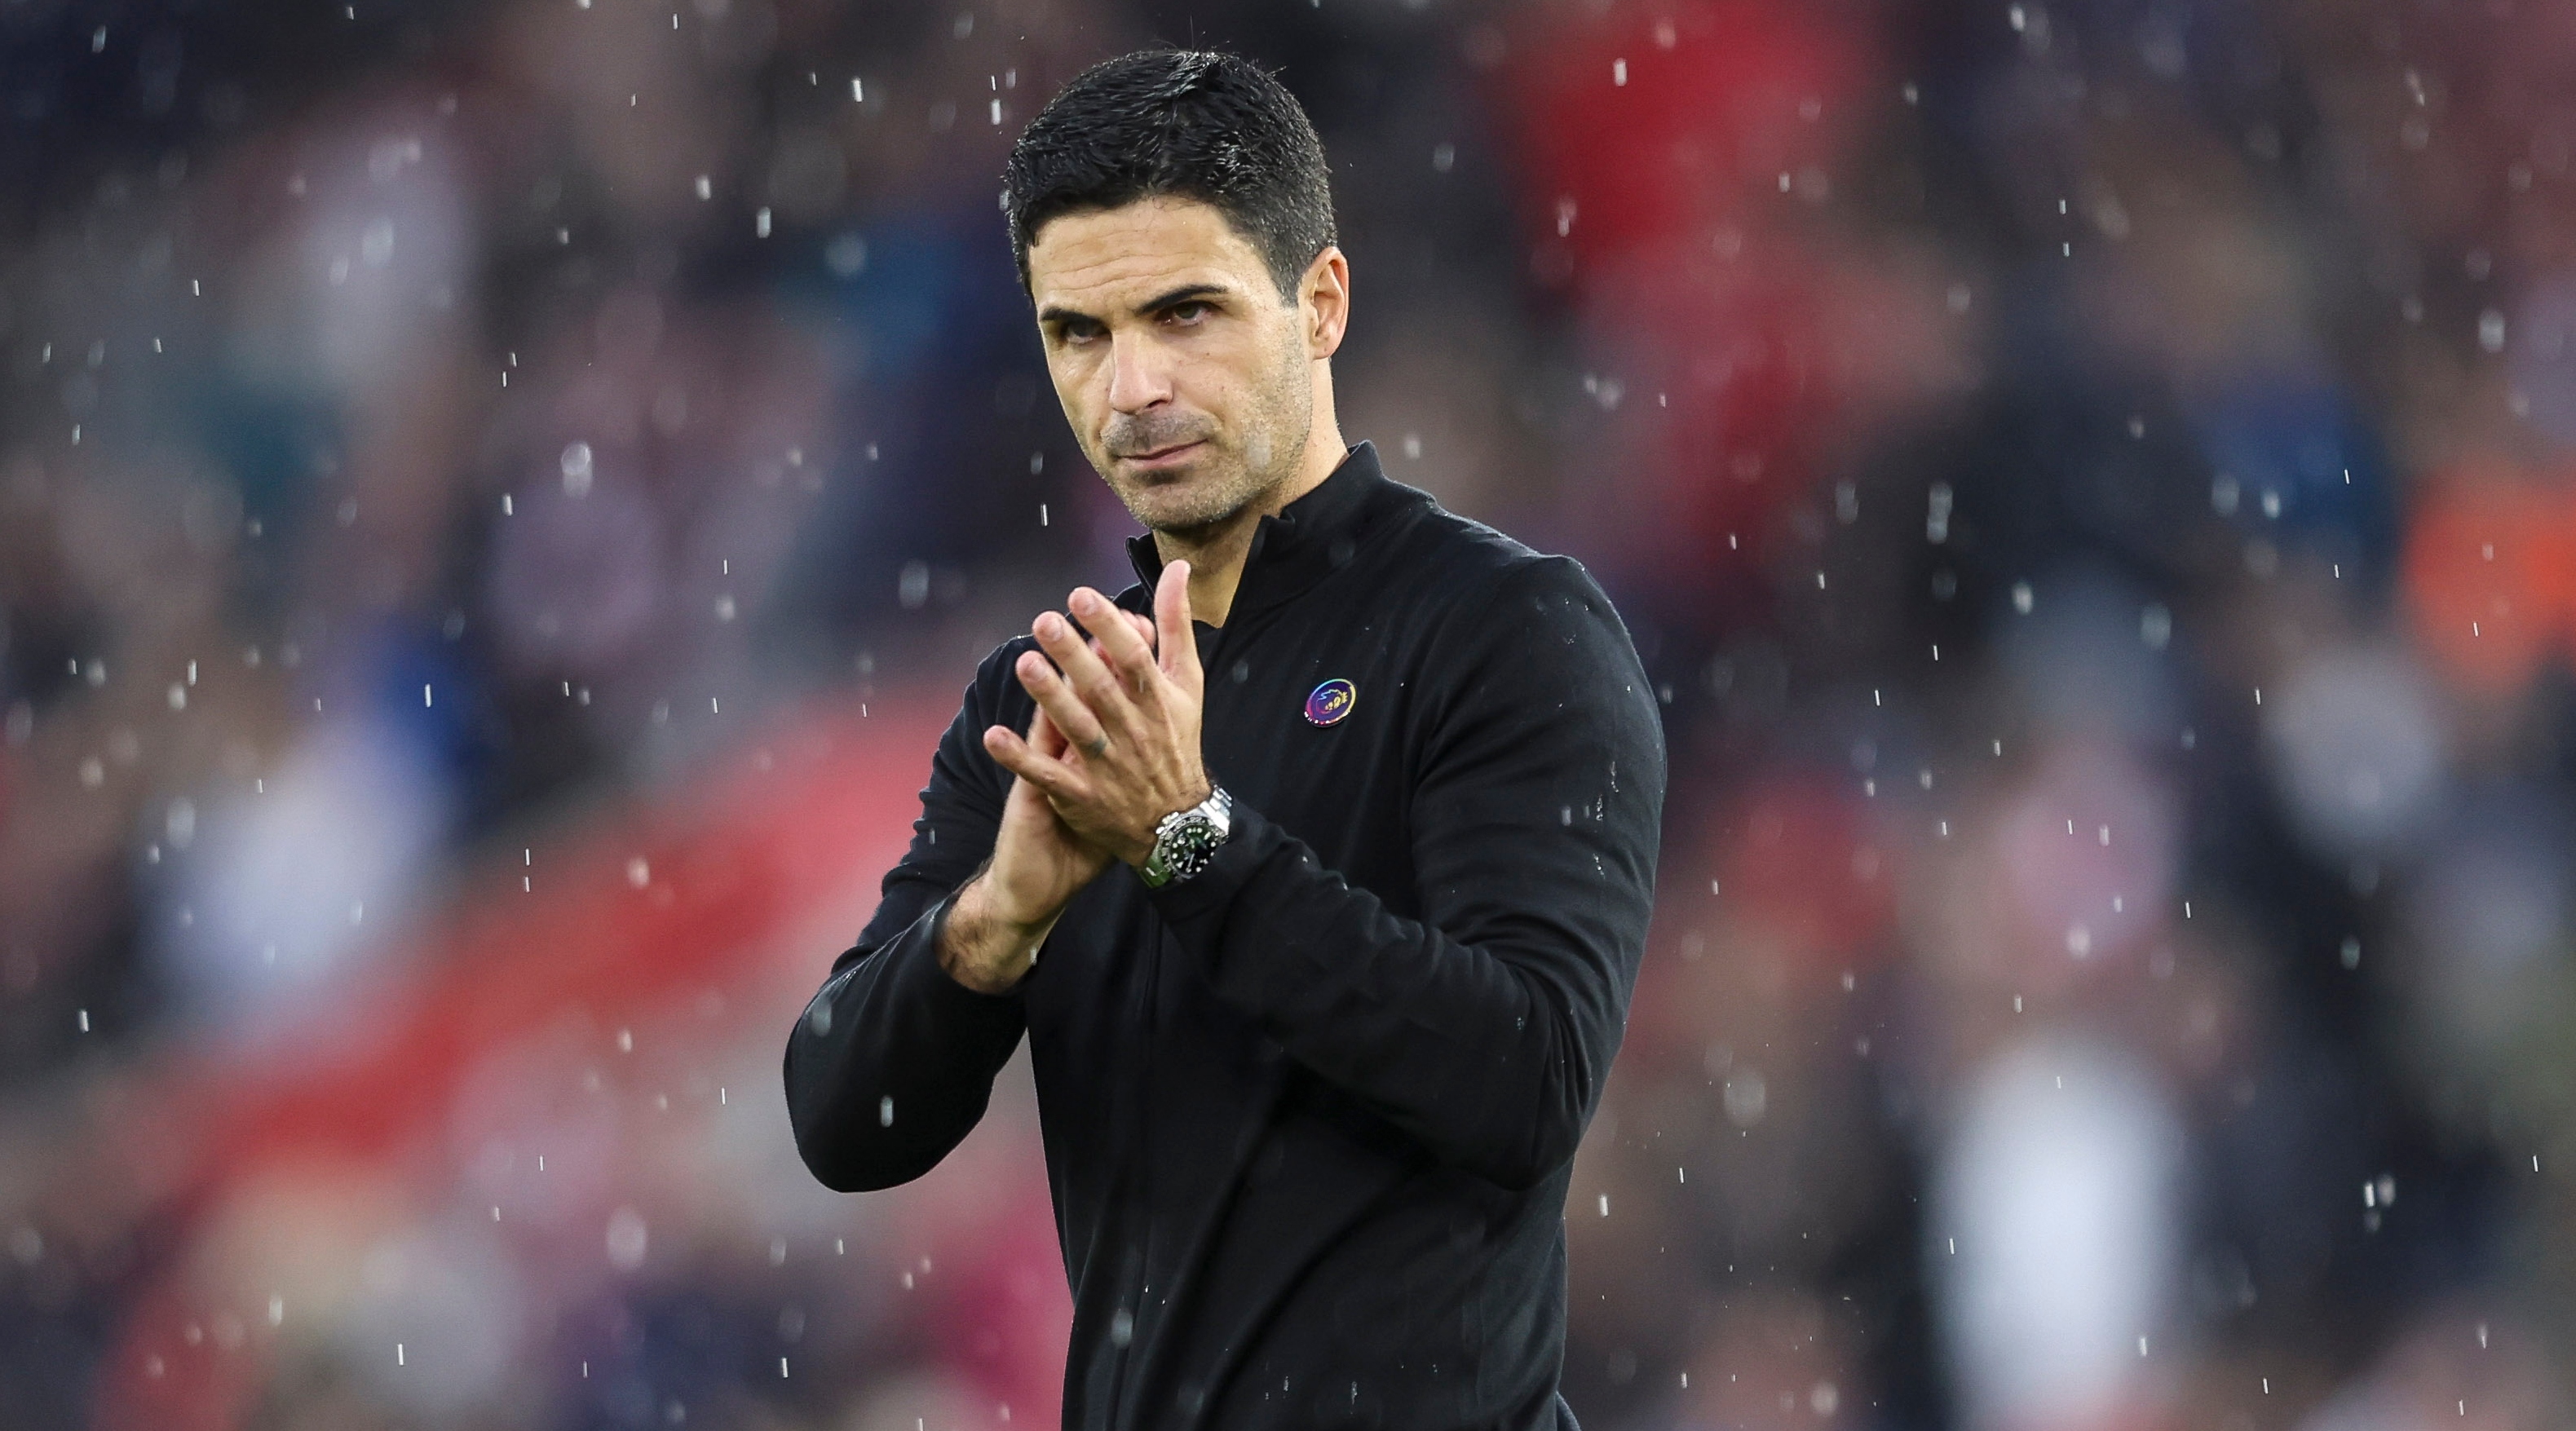 Arsenal manager Mikel Arteta applauds his club's traveling fans after the Premier League match between Southampton and Arsenal on October 23, 2022 at St. Mary's, Southampton, UK